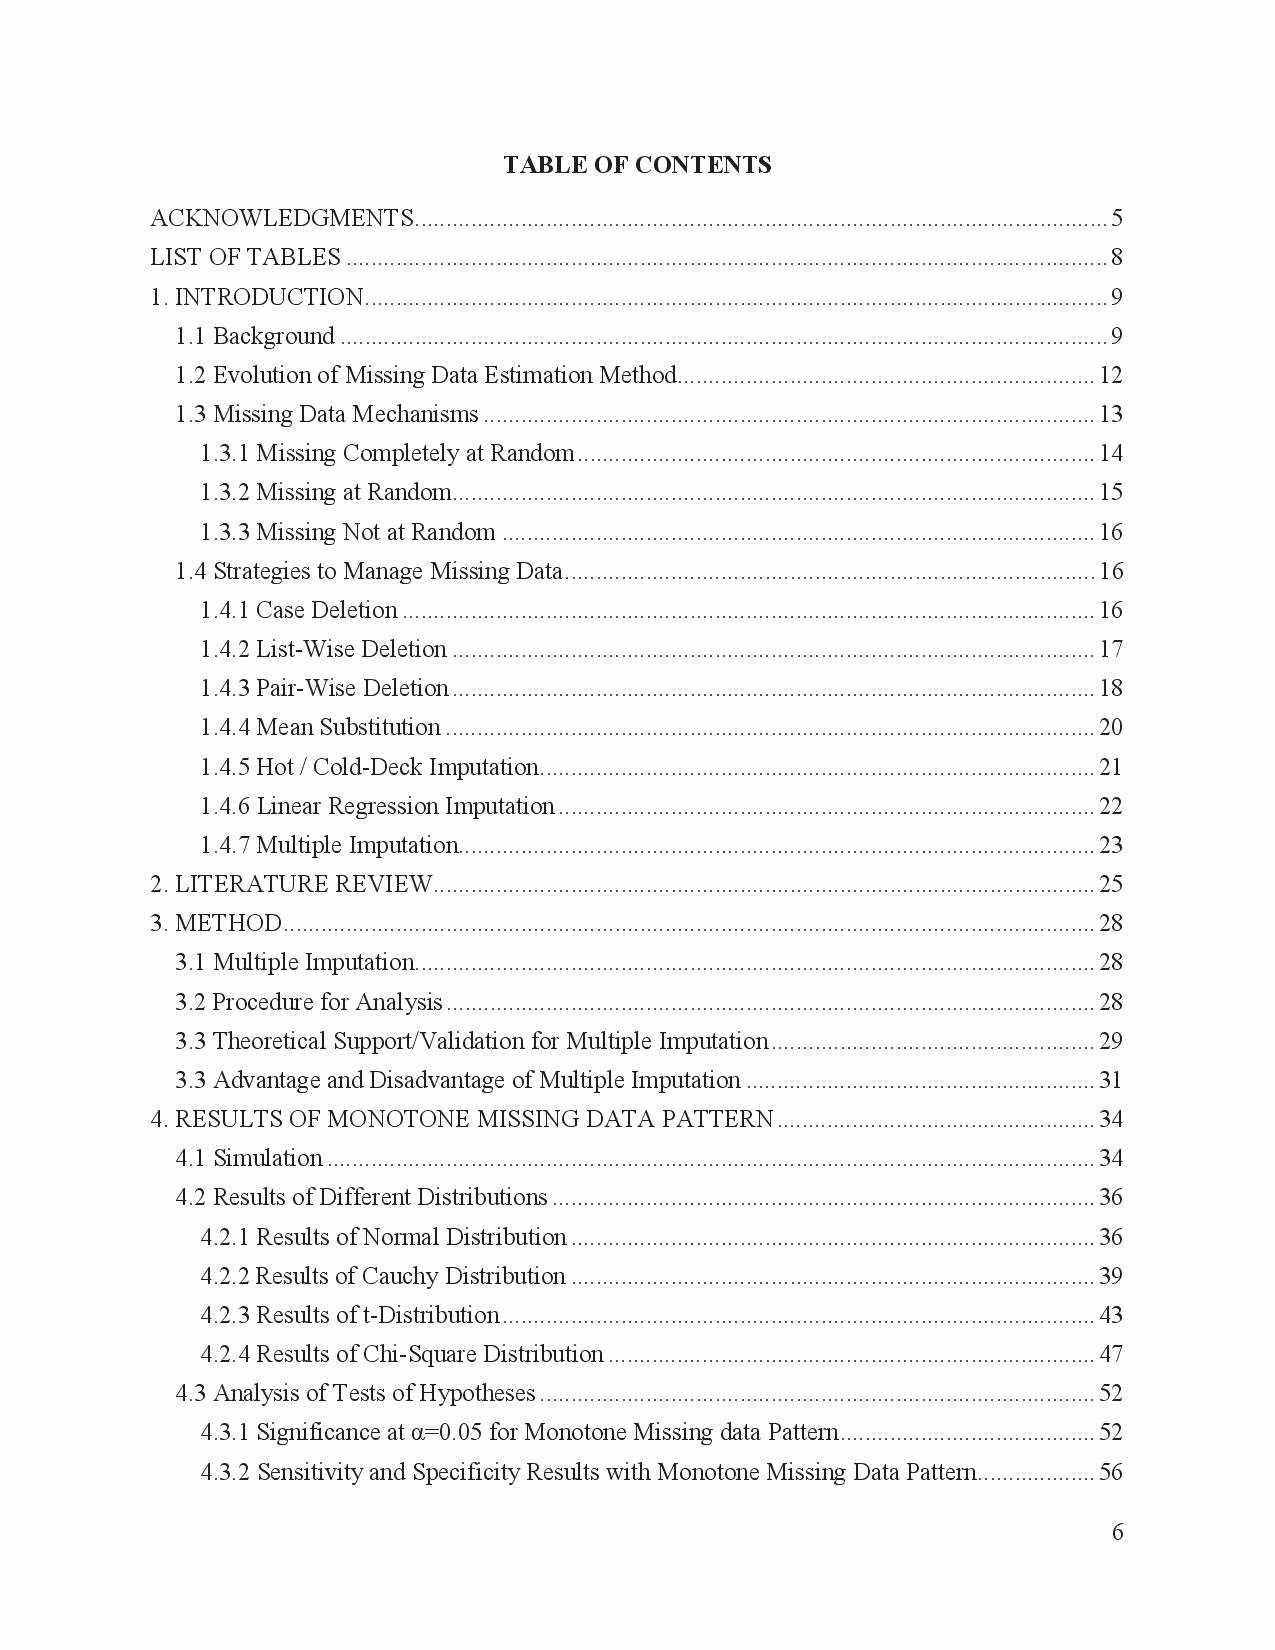 Table Of Contents Template Awesome Customized Table Of Contents Apa Style Tex Latex Stack